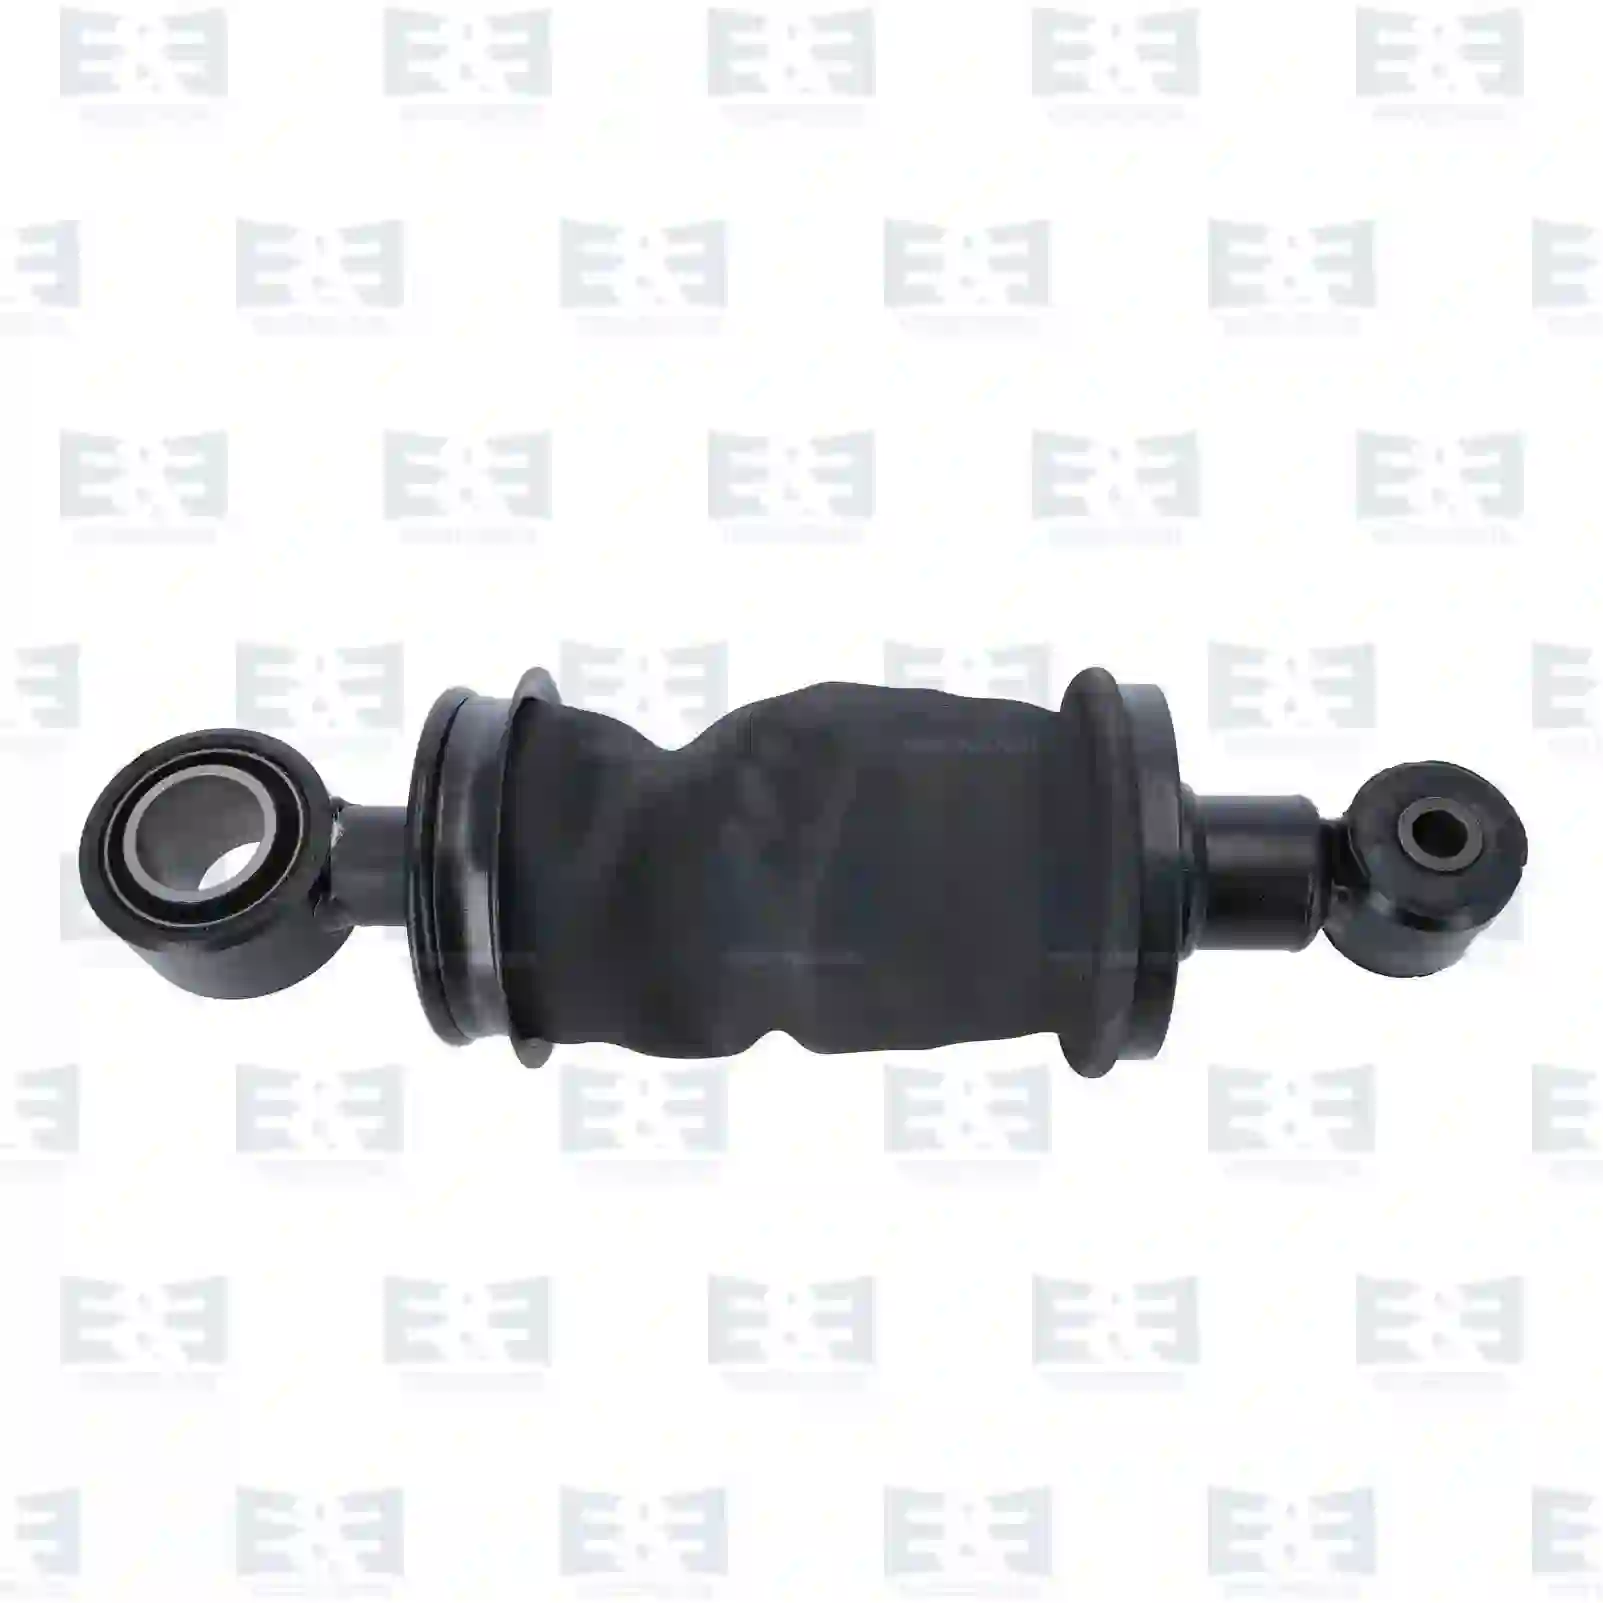 Cabin shock absorber, with air bellow, 2E2275073, 9603109855 ||  2E2275073 E&E Truck Spare Parts | Truck Spare Parts, Auotomotive Spare Parts Cabin shock absorber, with air bellow, 2E2275073, 9603109855 ||  2E2275073 E&E Truck Spare Parts | Truck Spare Parts, Auotomotive Spare Parts